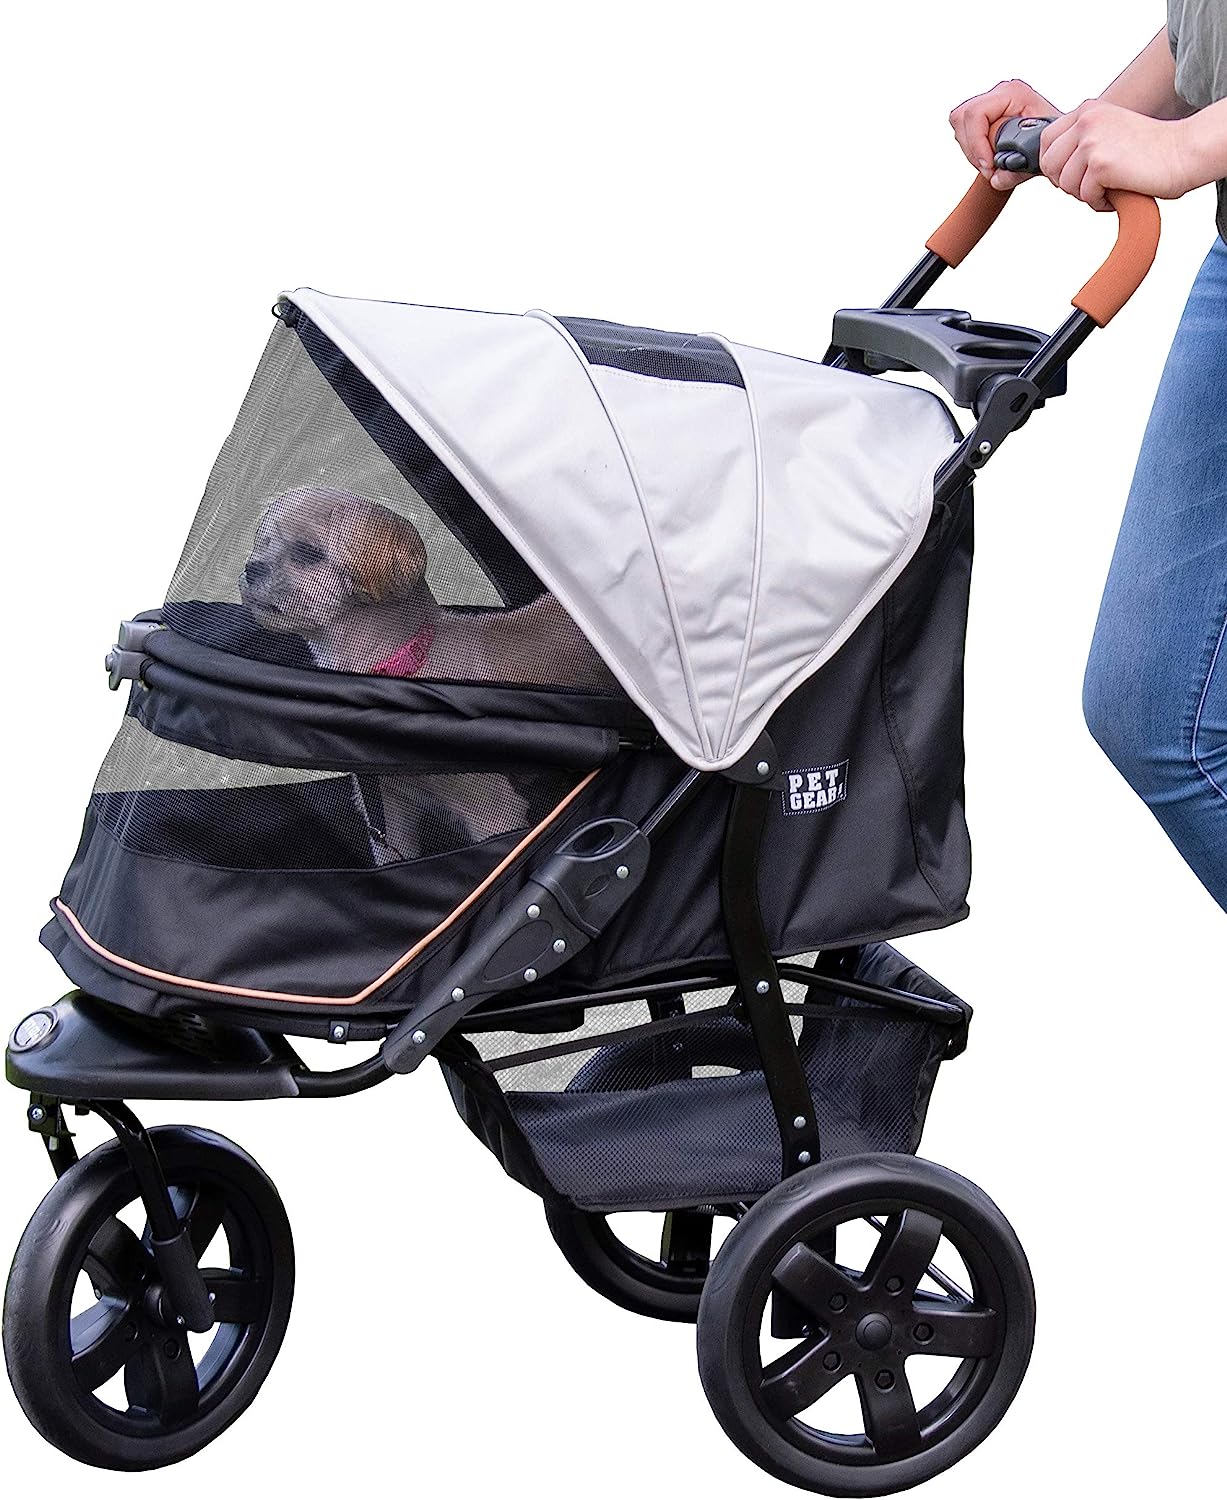 three wheeled pet stroller with gray top